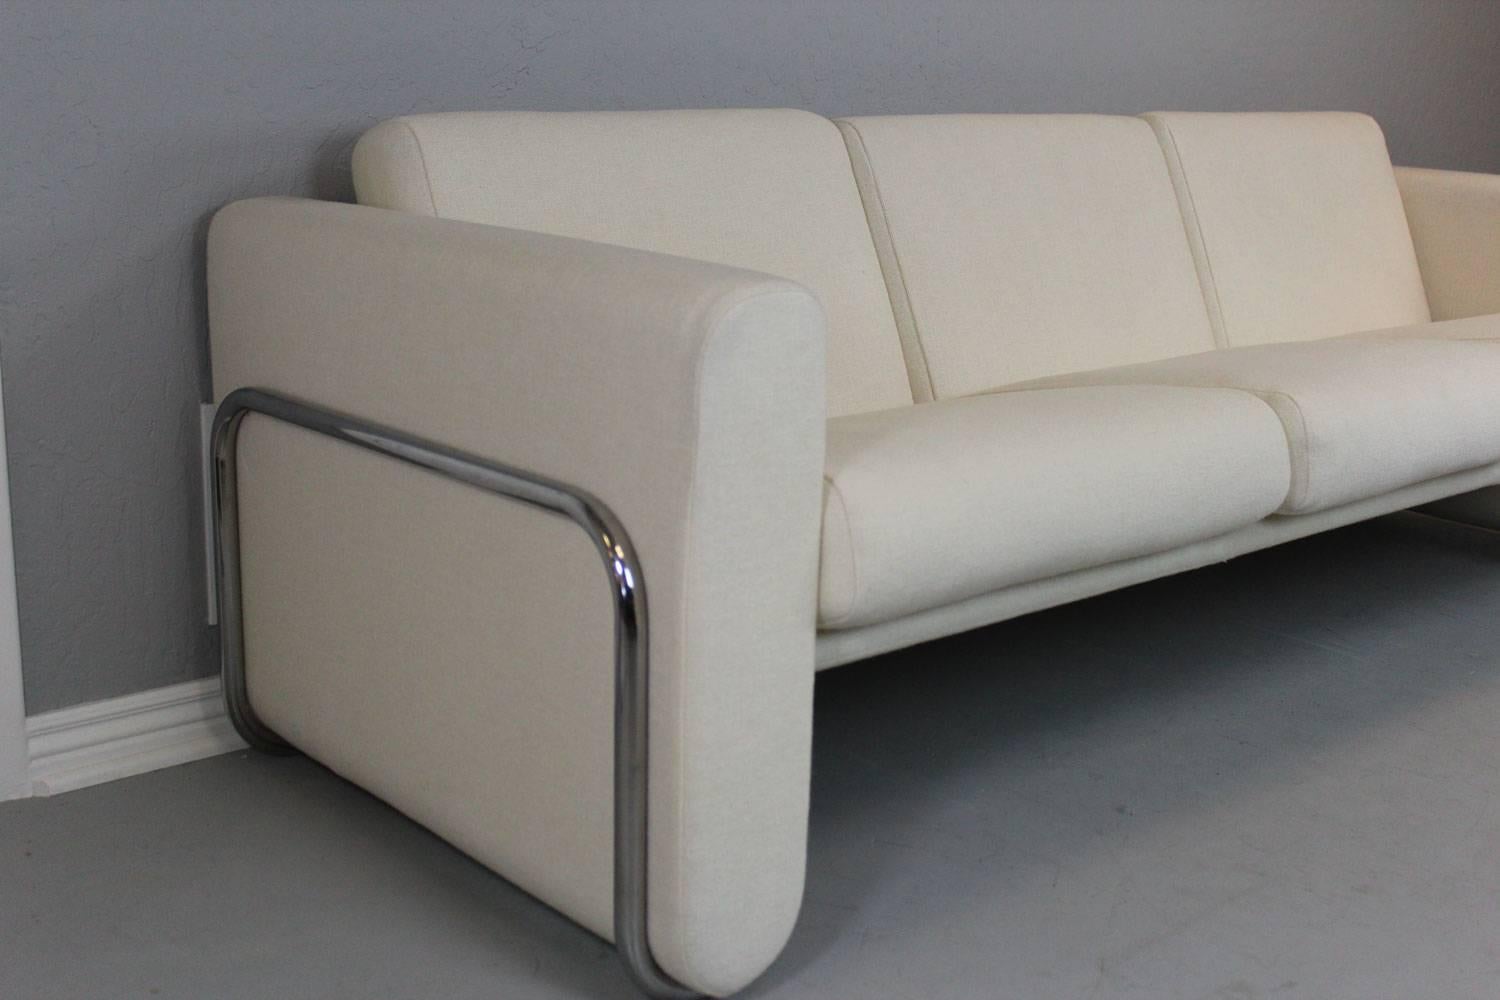 LeCorbusier style white sofa with stainless steel wrap around frame. Custom-made for an architect in the mid-1960s by Herman Miller. All original long wearing wool fabric. Superb condition. A show stopper.

Dimensions: Sofa - 86